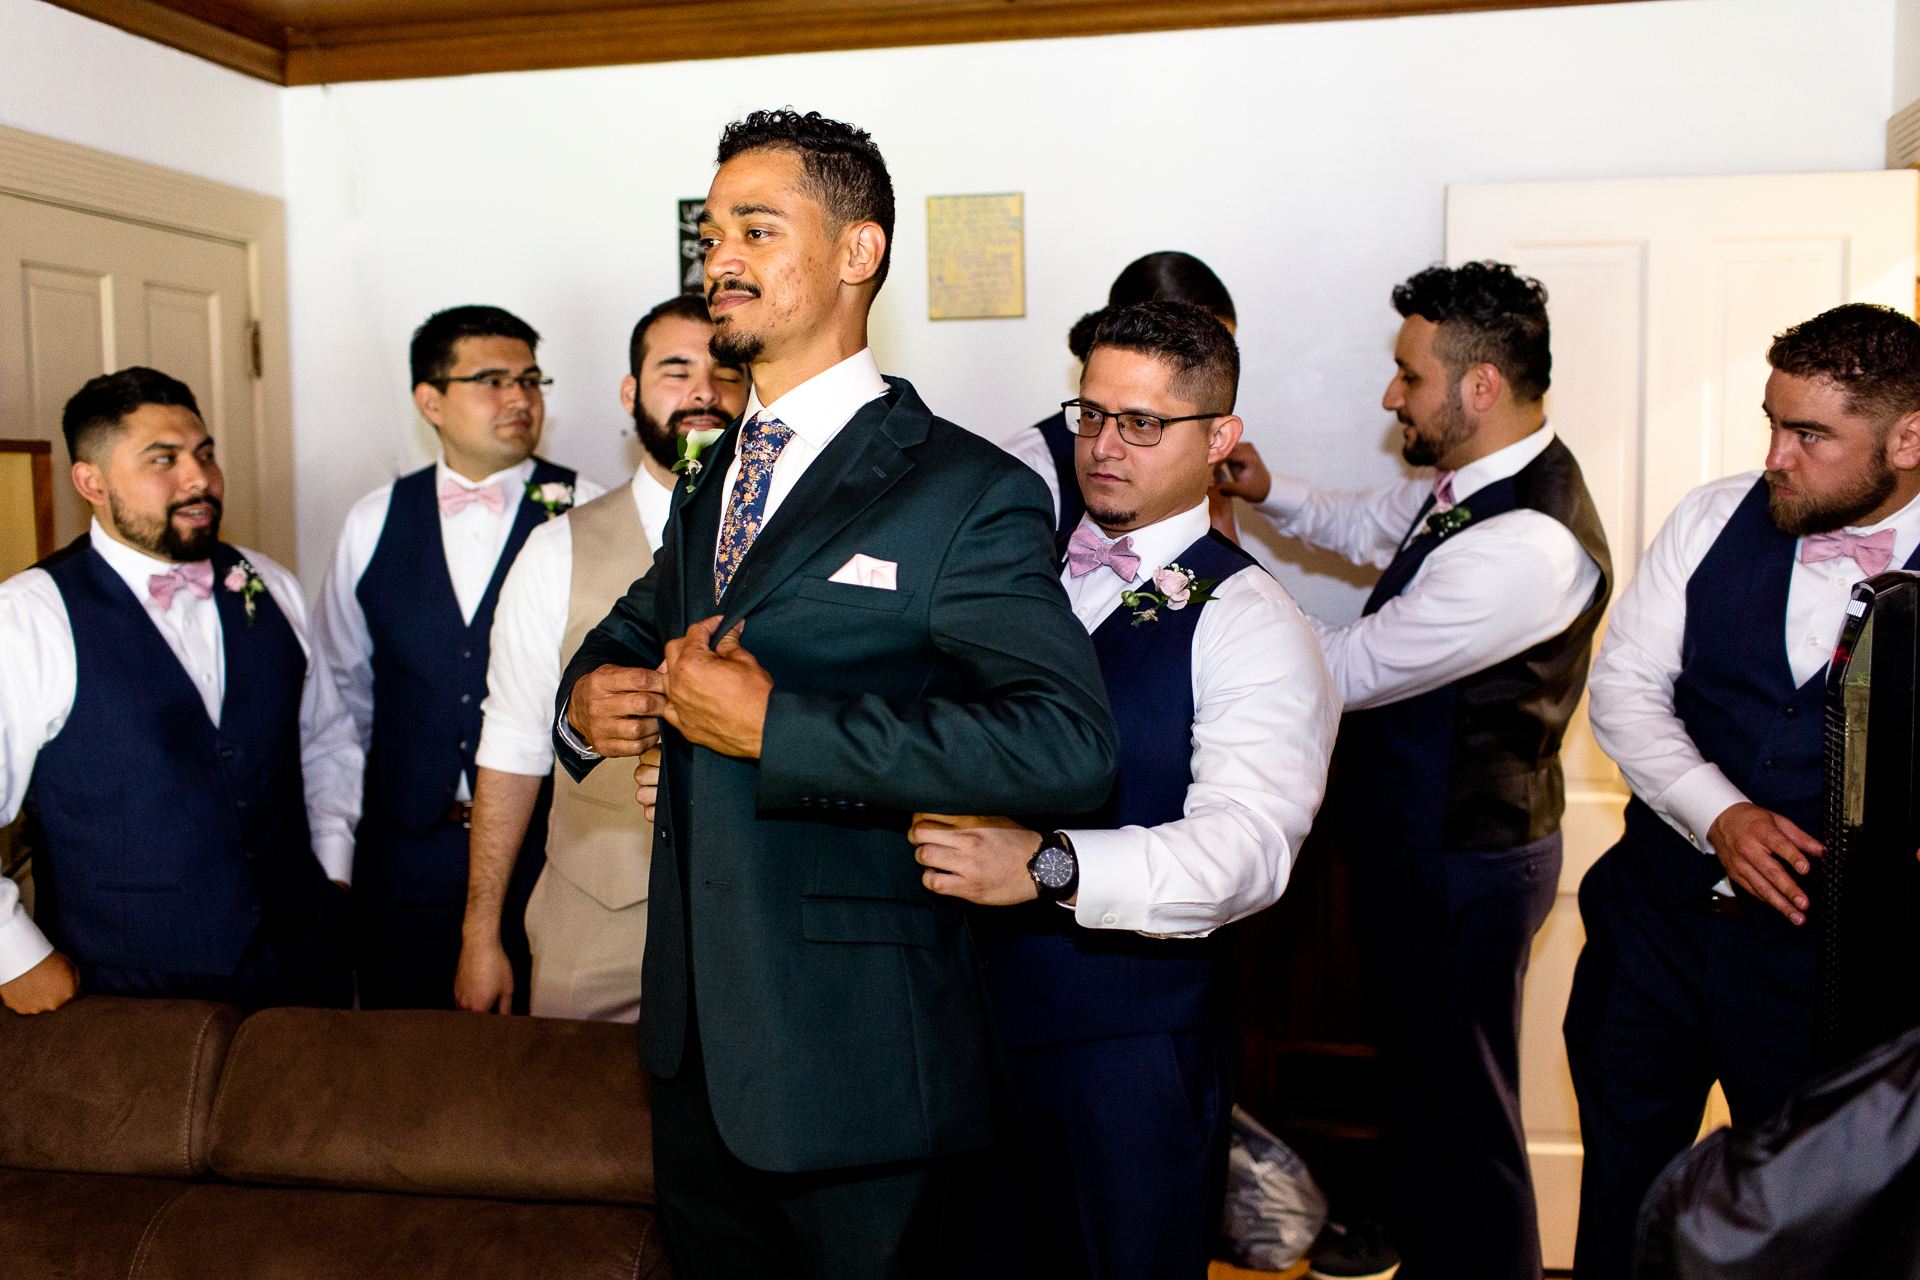 groom getting ready with his groomsmen - green suit